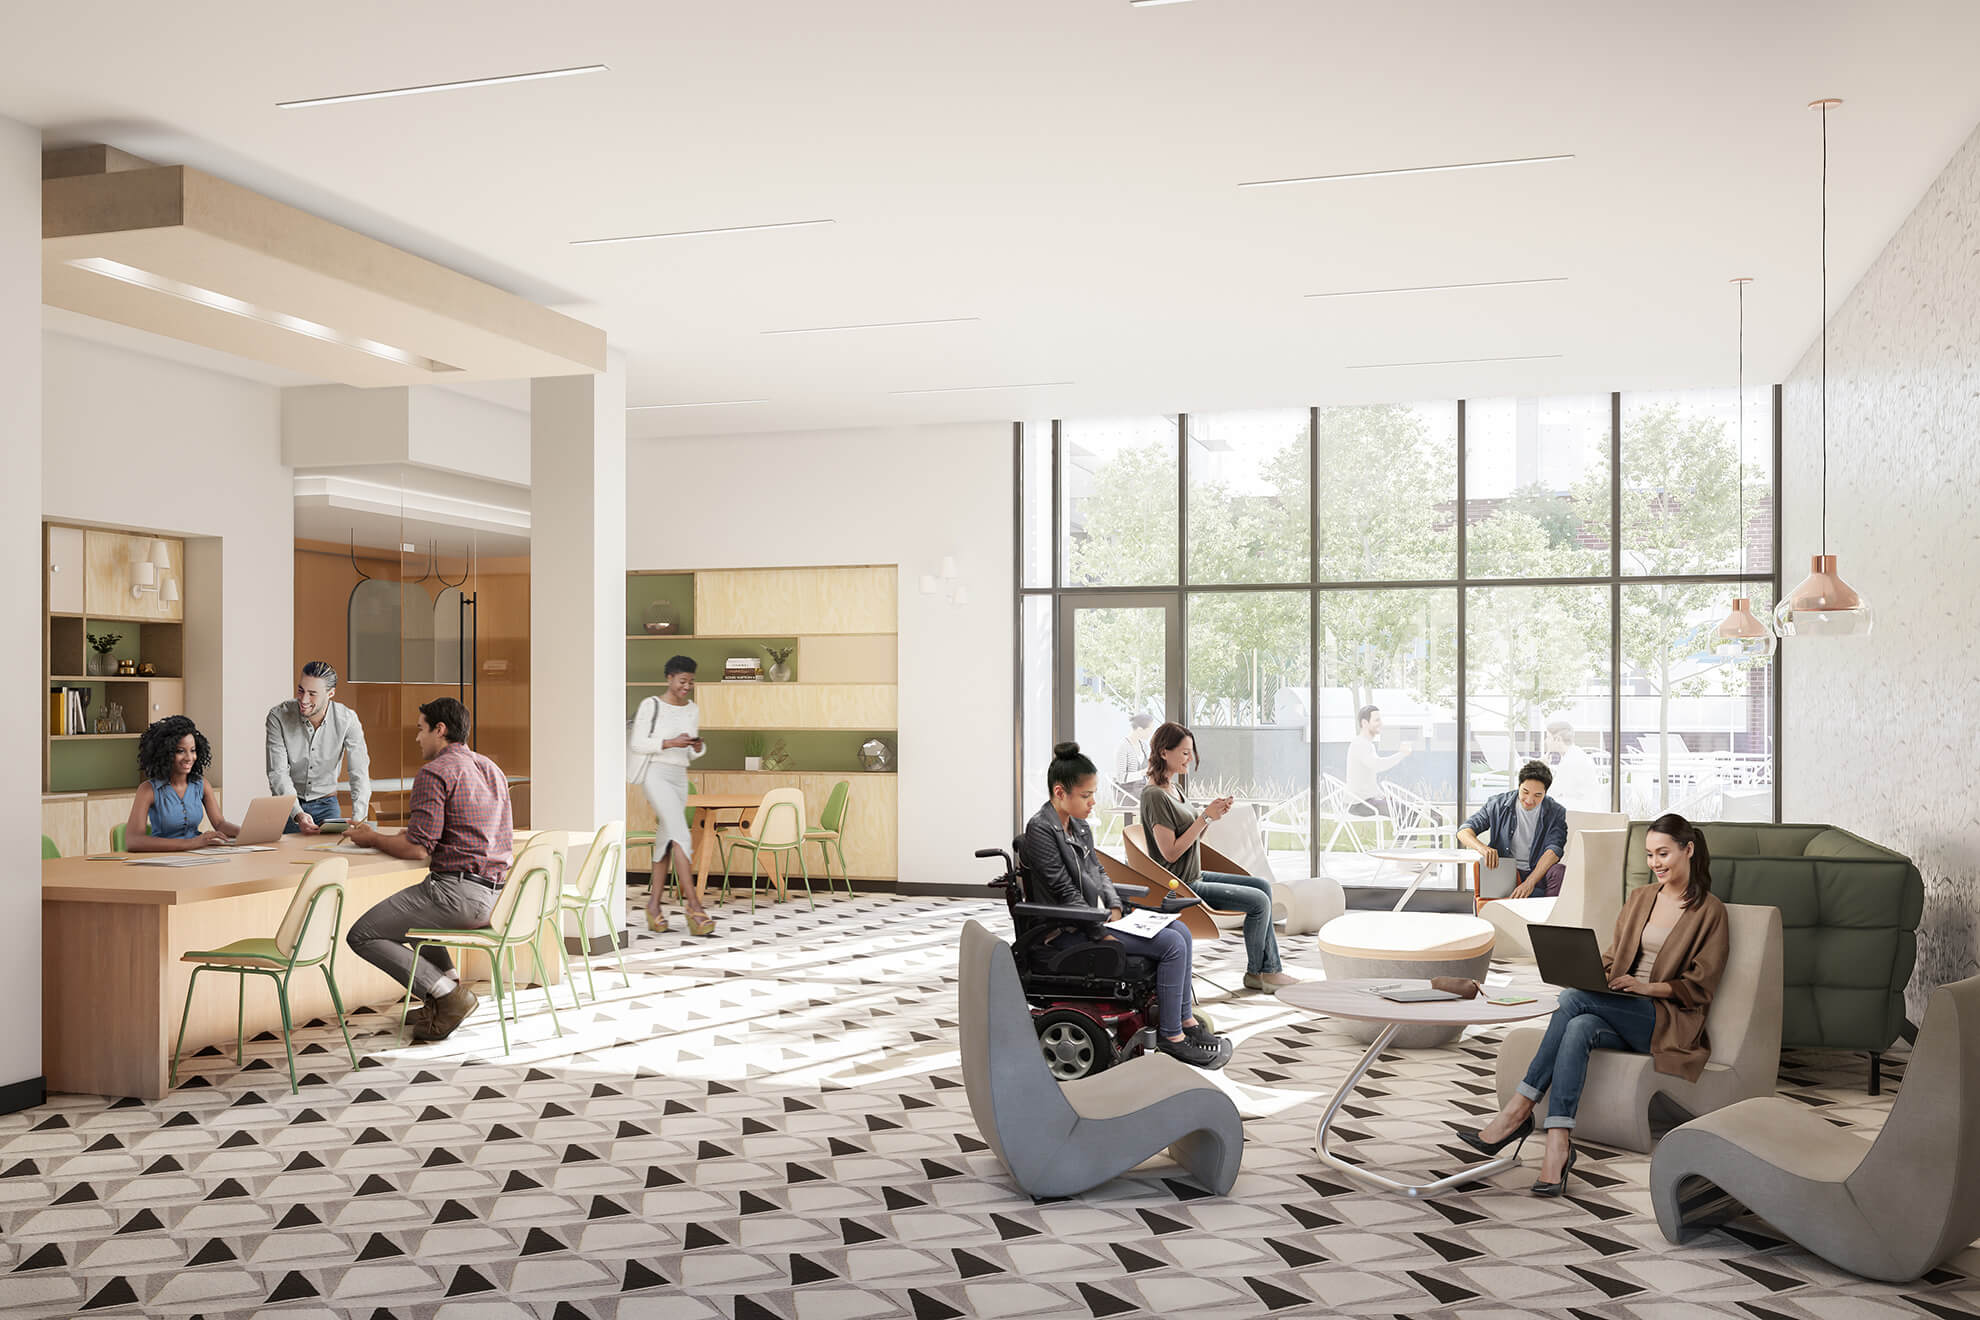 Digital render of the Artsy co-working space. Various people including someone is a wheelchair working at desks and lounge chairs.